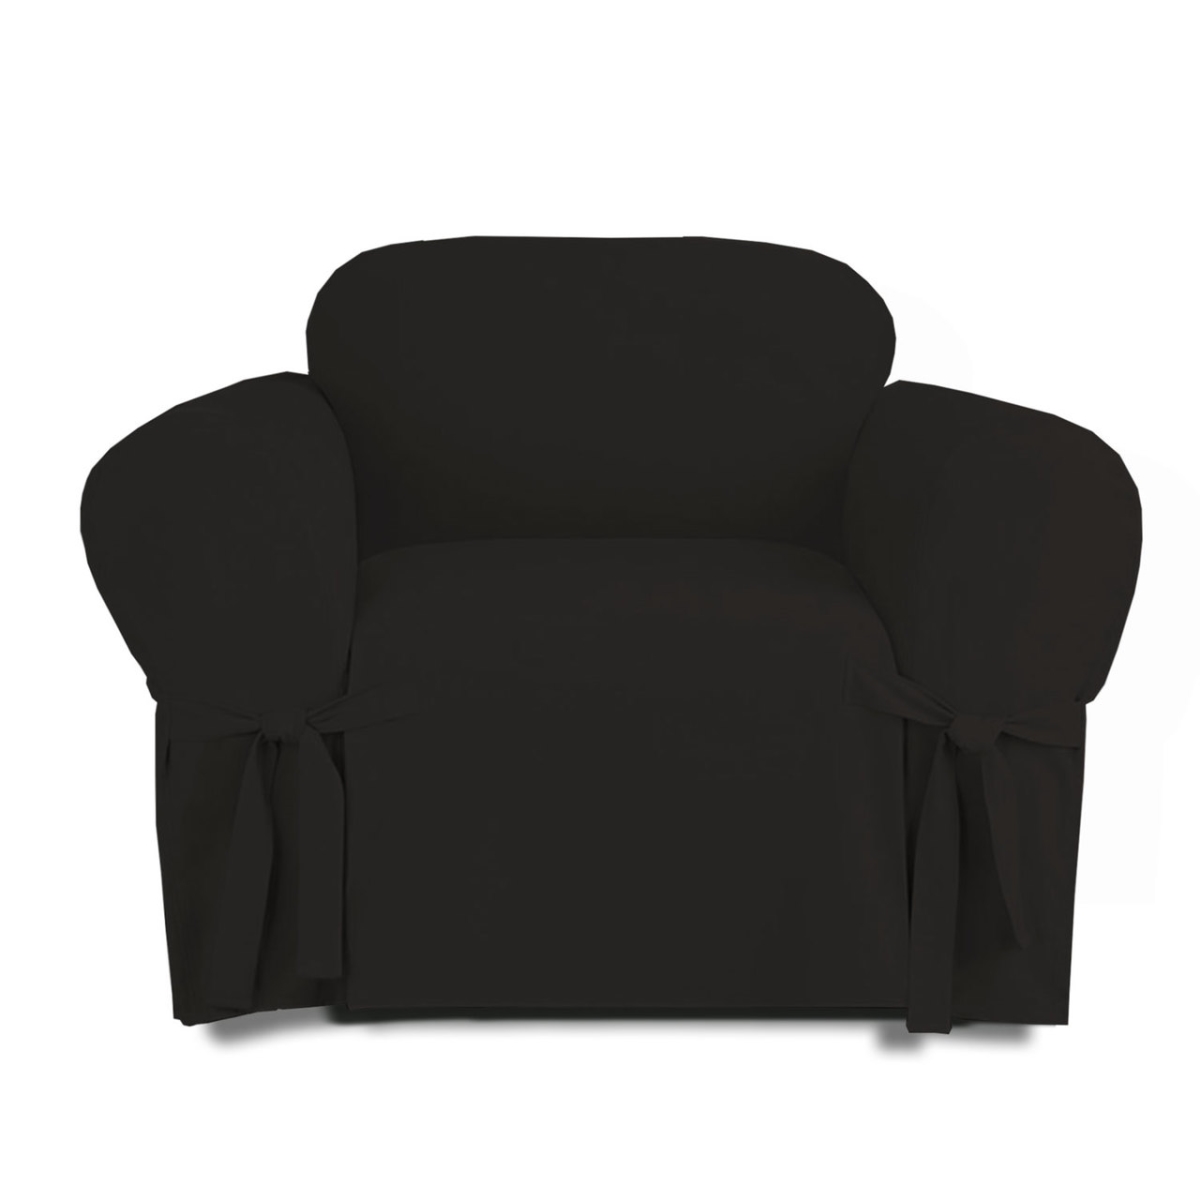 Sc406714 Microsuede Slip Furniture Protector For Chair, Black